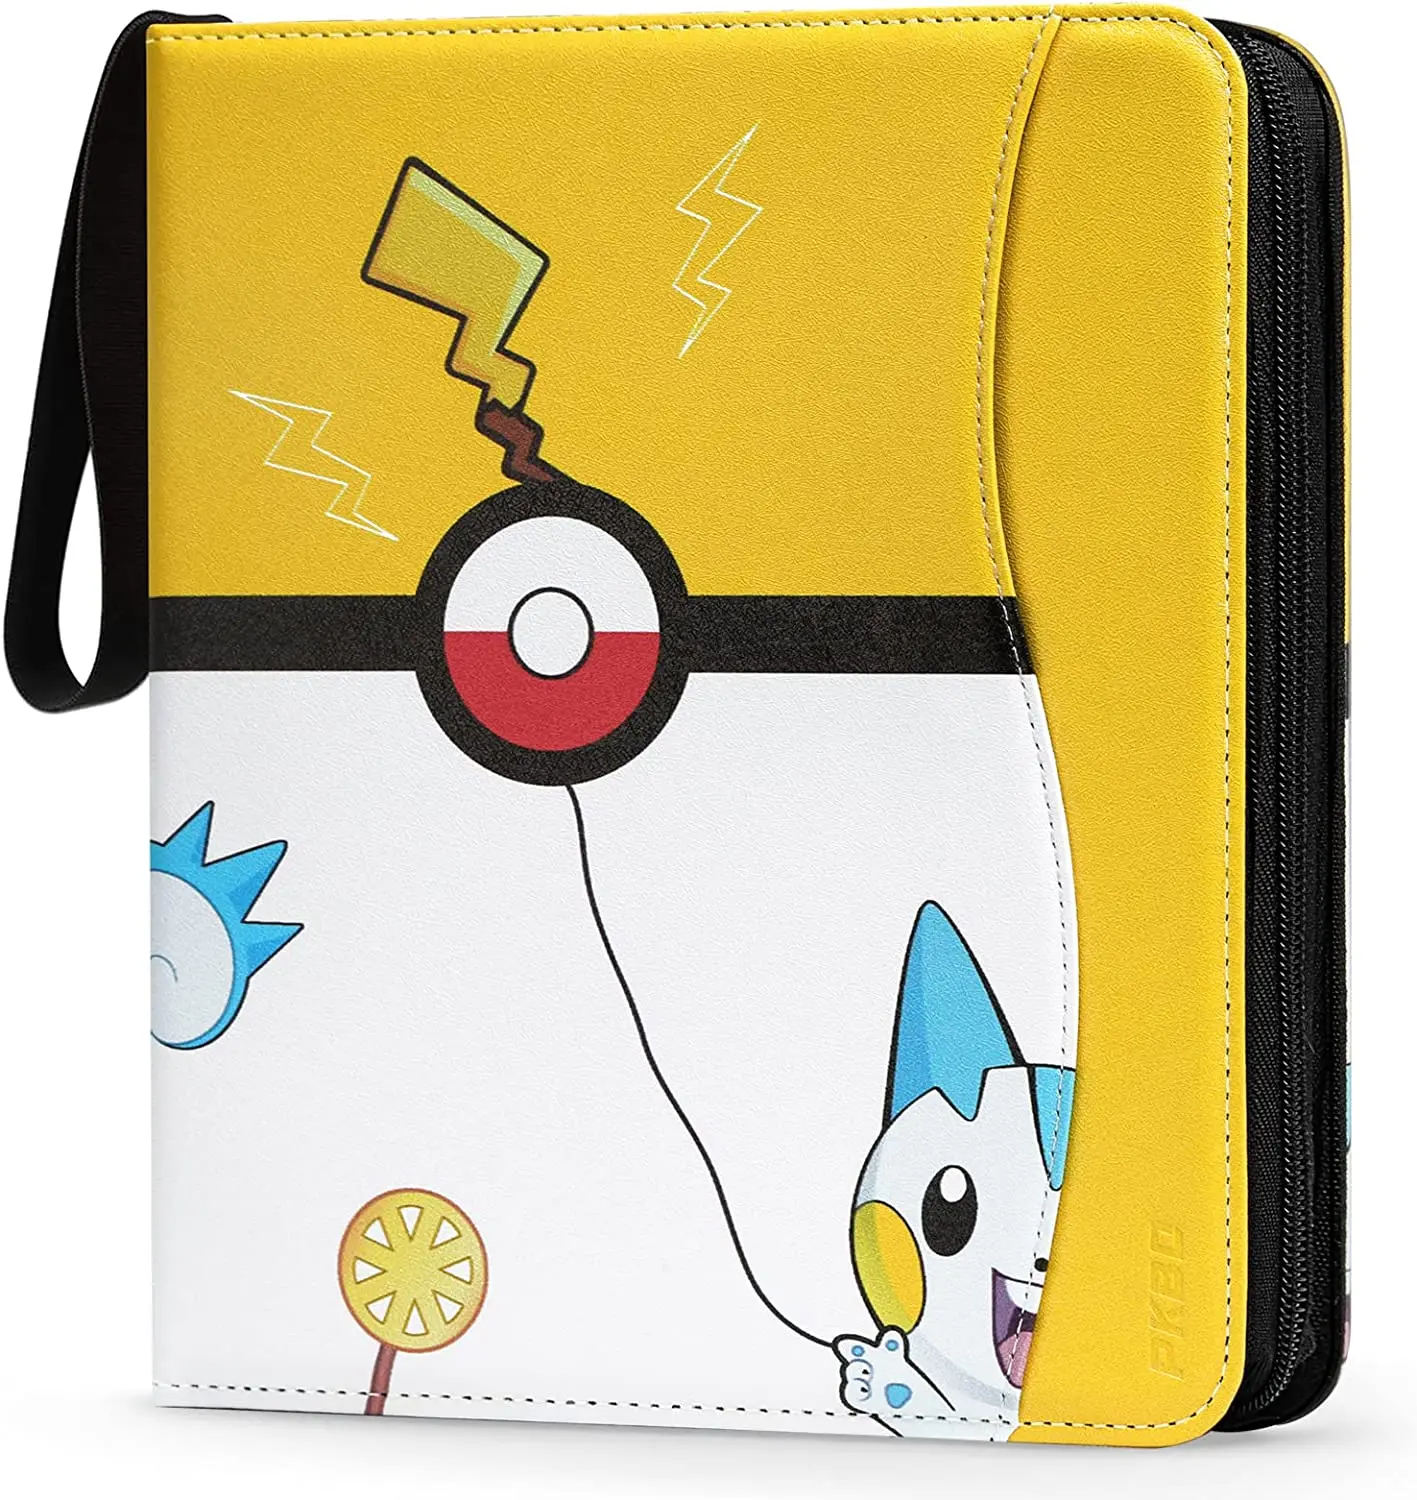 Pokemon Card Binder 4-Pocket with Zipper Removable Sleeves – Benazcap